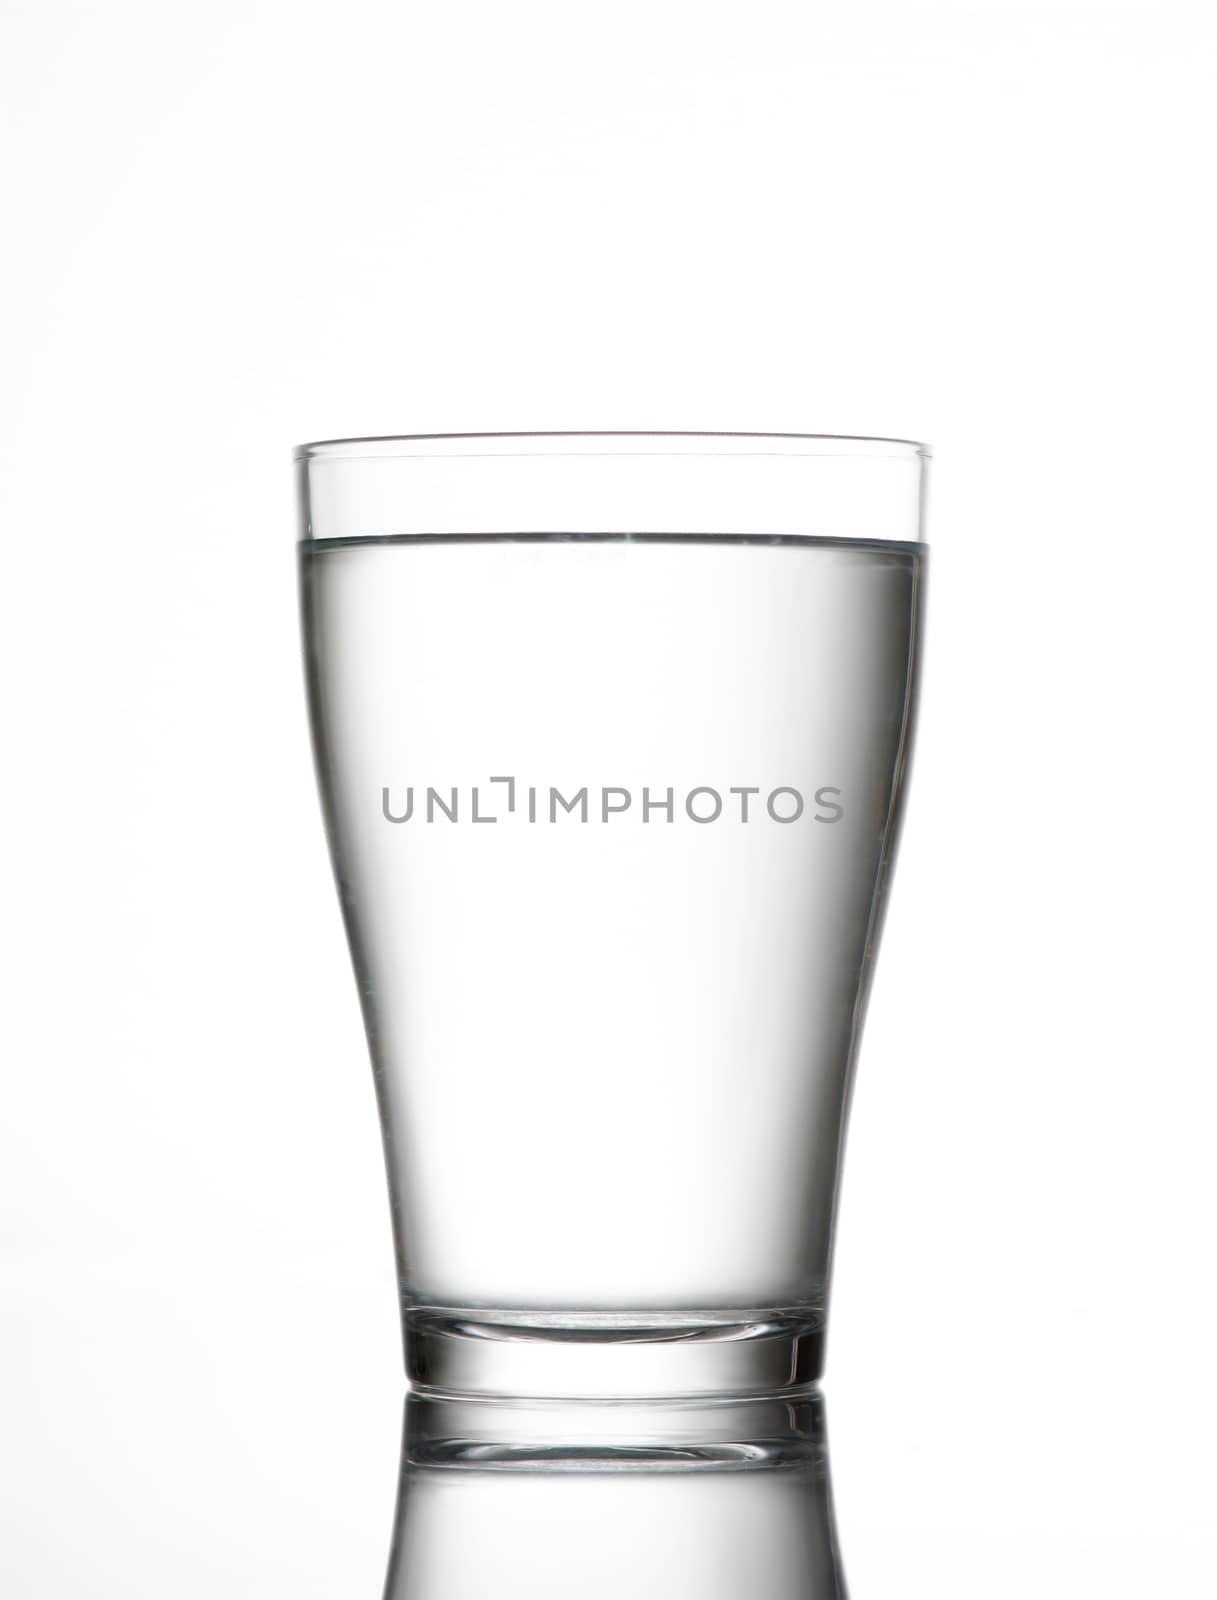 Glass of fresh water isolated on white background. 